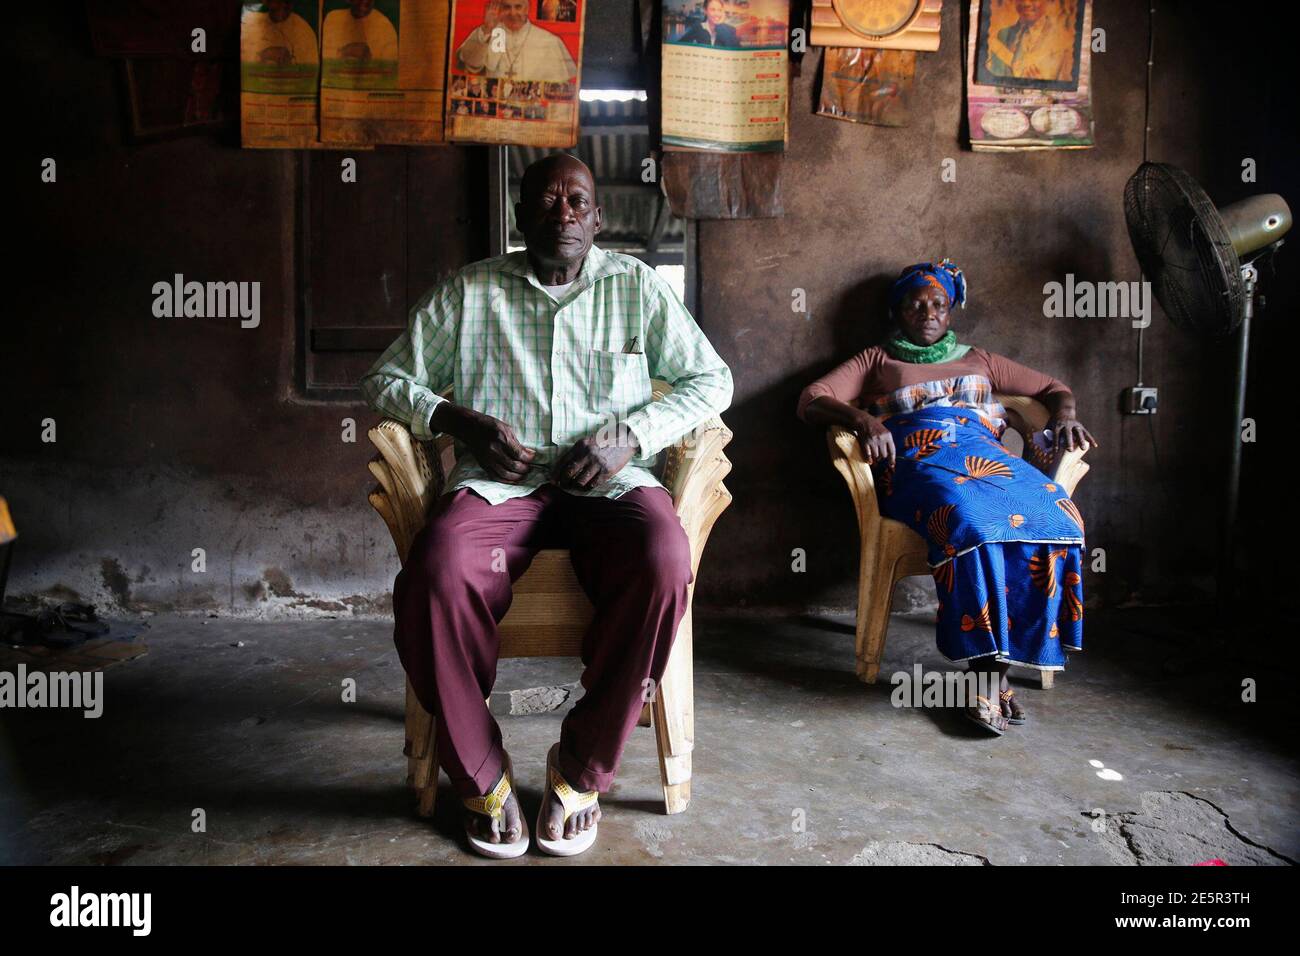 Environmental activist Fedelis Oguru, who filed a suit with the support of Friends of Earth international in a court against Shell oil company in Netherlands, sits for portrait photograph in his home in Oruma village, Ogbia district in Nigeria's Bayelsa state, March 1, 2015. Nigerian President Goodluck Jonathan's flagship reform policies -- power and farming -- have not hugely benefited the delta. Power privatisation has yet to translate to more kilowatts on the grid anywhere, while reforms to farming, especially cutting corrupt middle men out of a state fertiliser scheme, has disproportionate Stock Photo